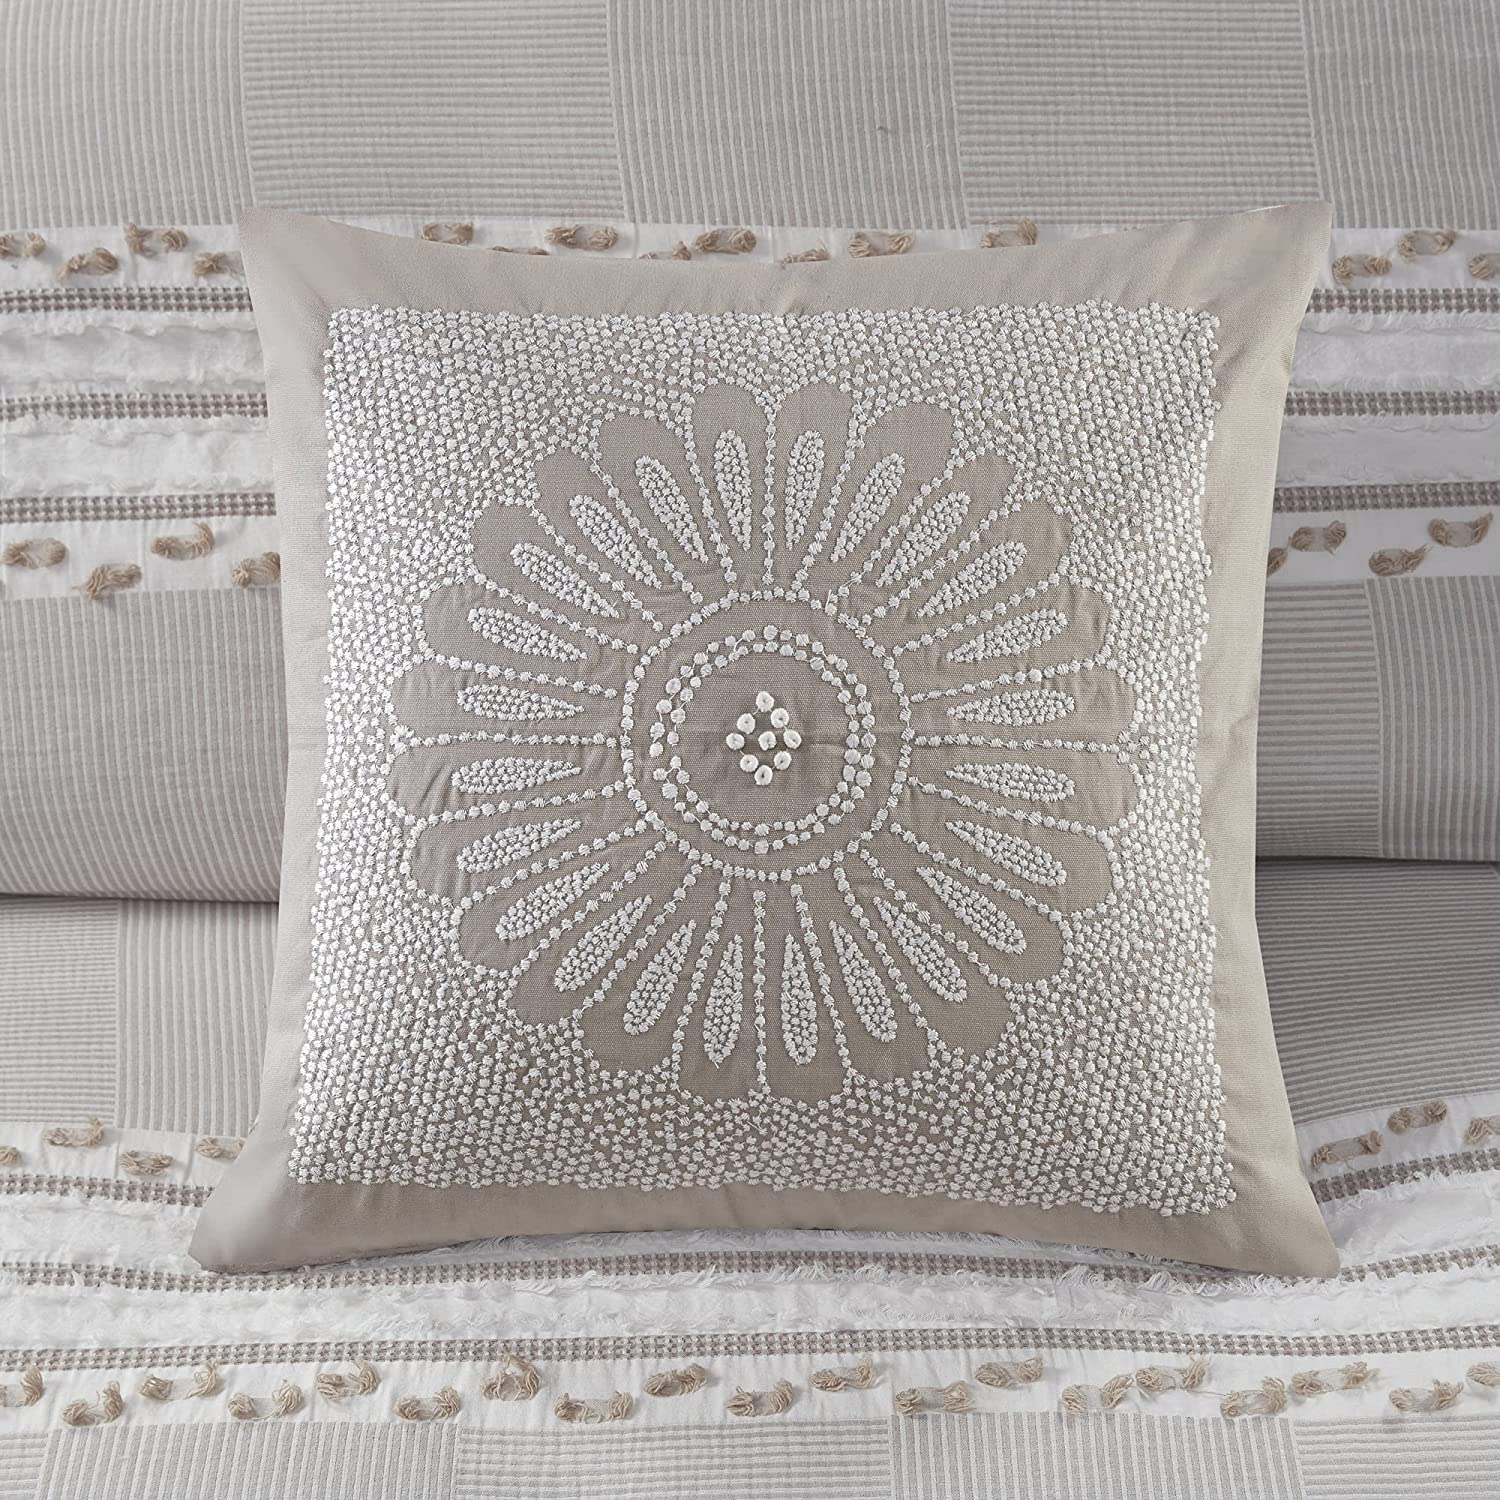 INK+IVY Sofia Mid Century Modern Cotton Square Decorative Pillow Sofa Cushion Lumbar, Back Support, 20"x 20", Medallion Embroidery Taupe